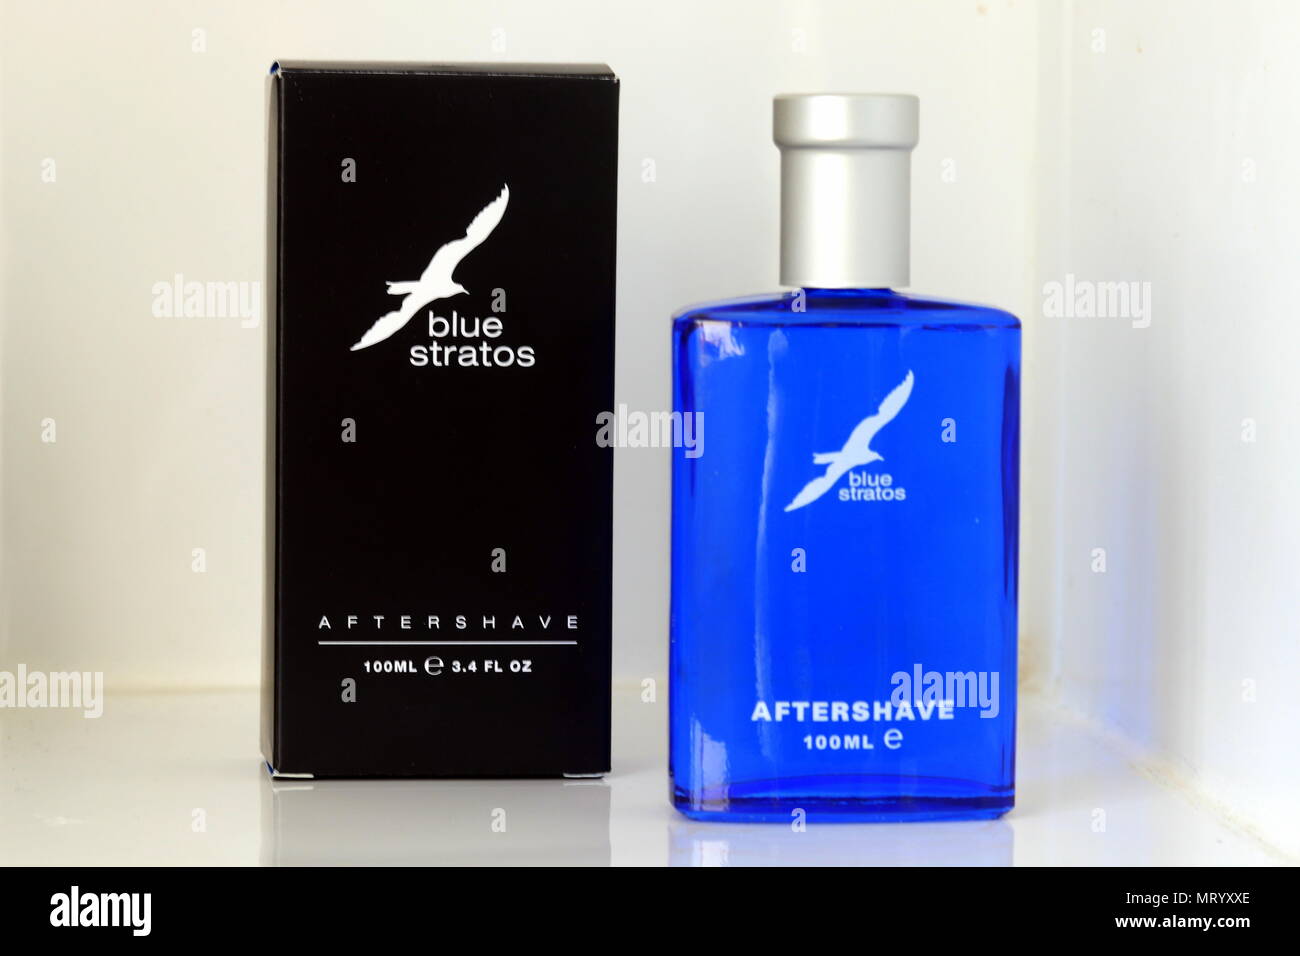 Blue Stratos aftershave bottle and box Stock Photo